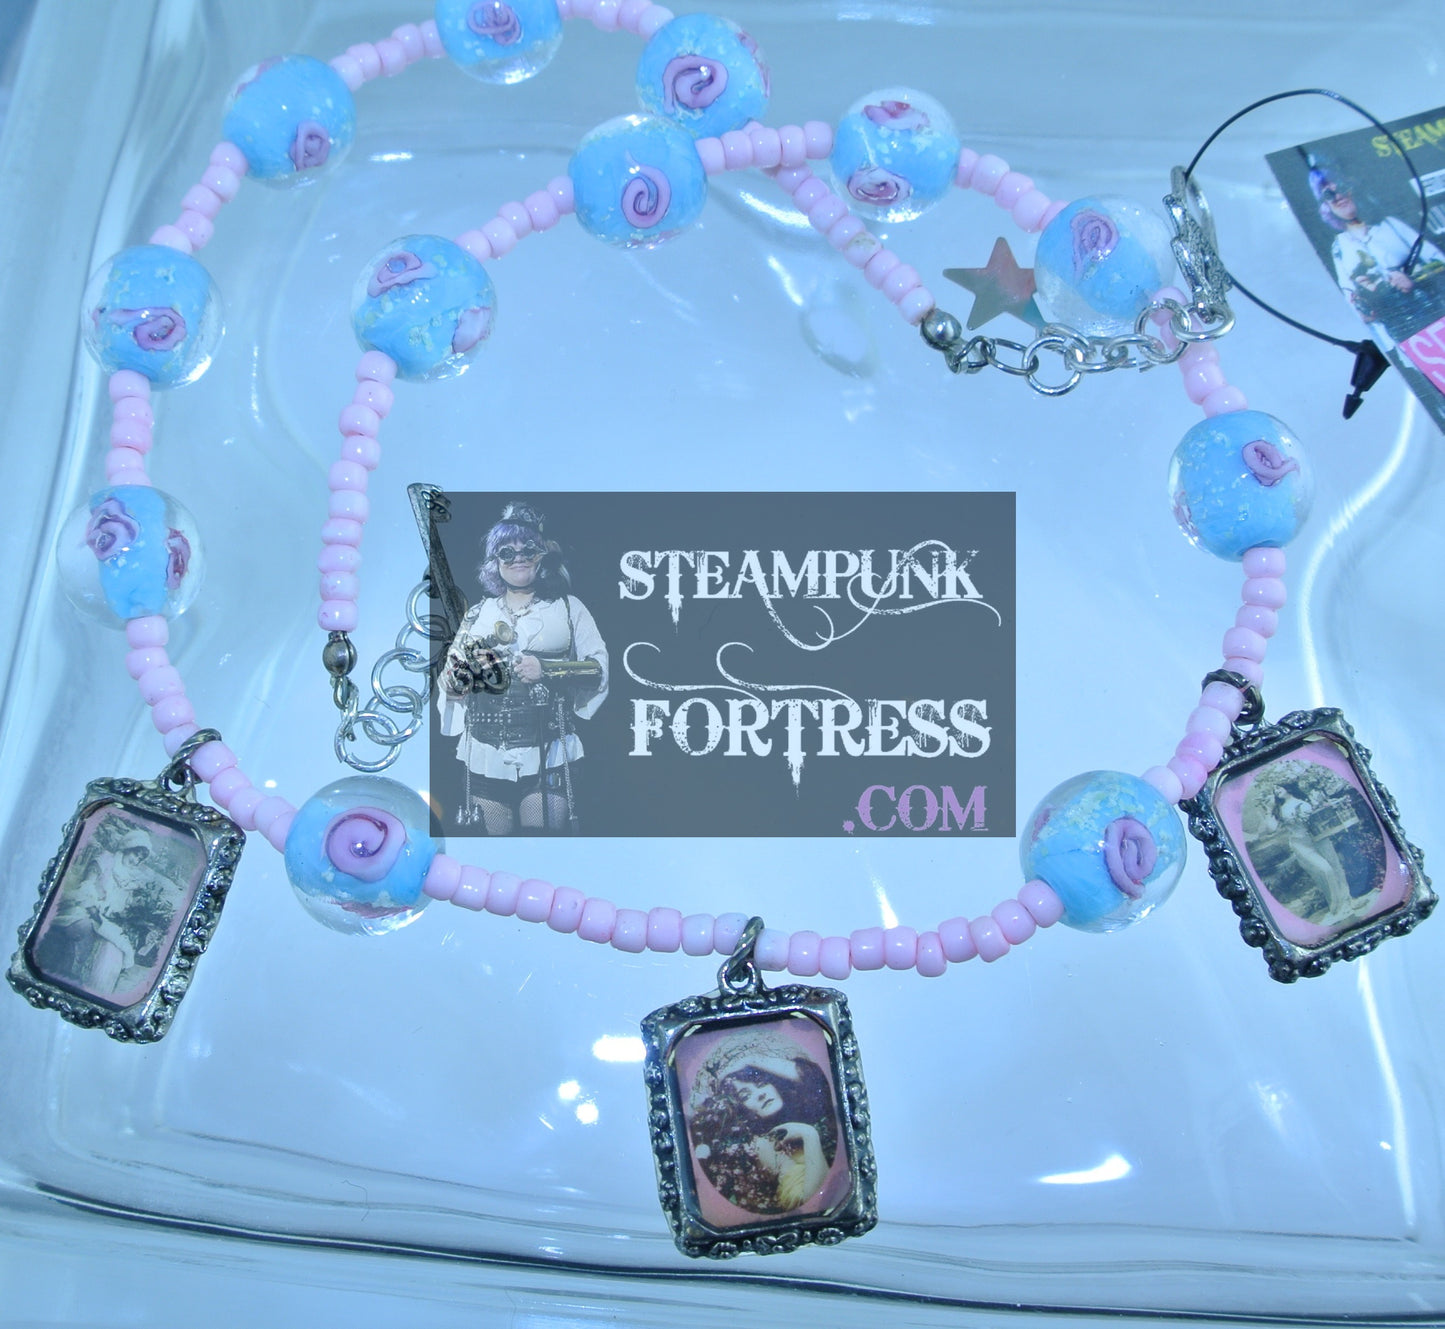 VINTAGE LADIES 3 PINK FRAMES GLOW IN THE DARK BLUE PINK BEADS NECKLACE SET AVAILABLE STARR WILDE STEAMPUNK FORTRESS